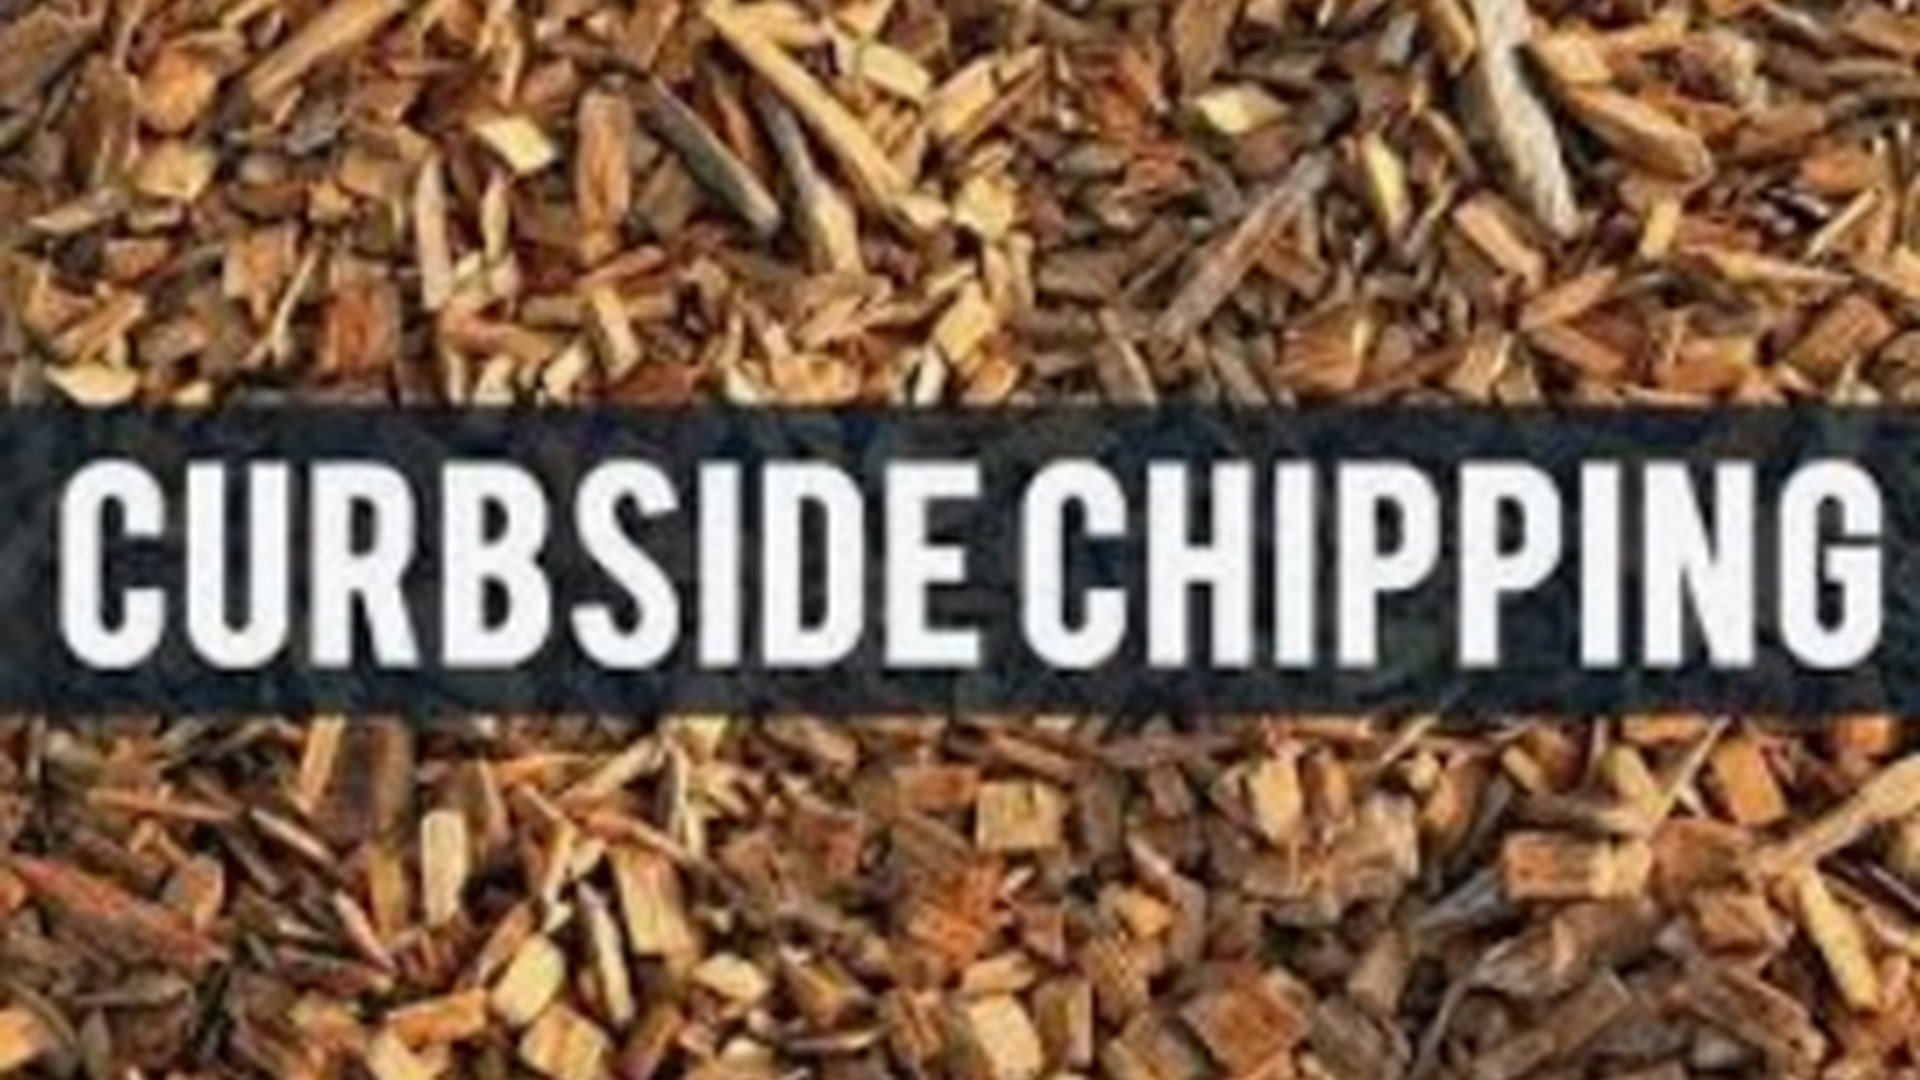 Curbside Chipping Image